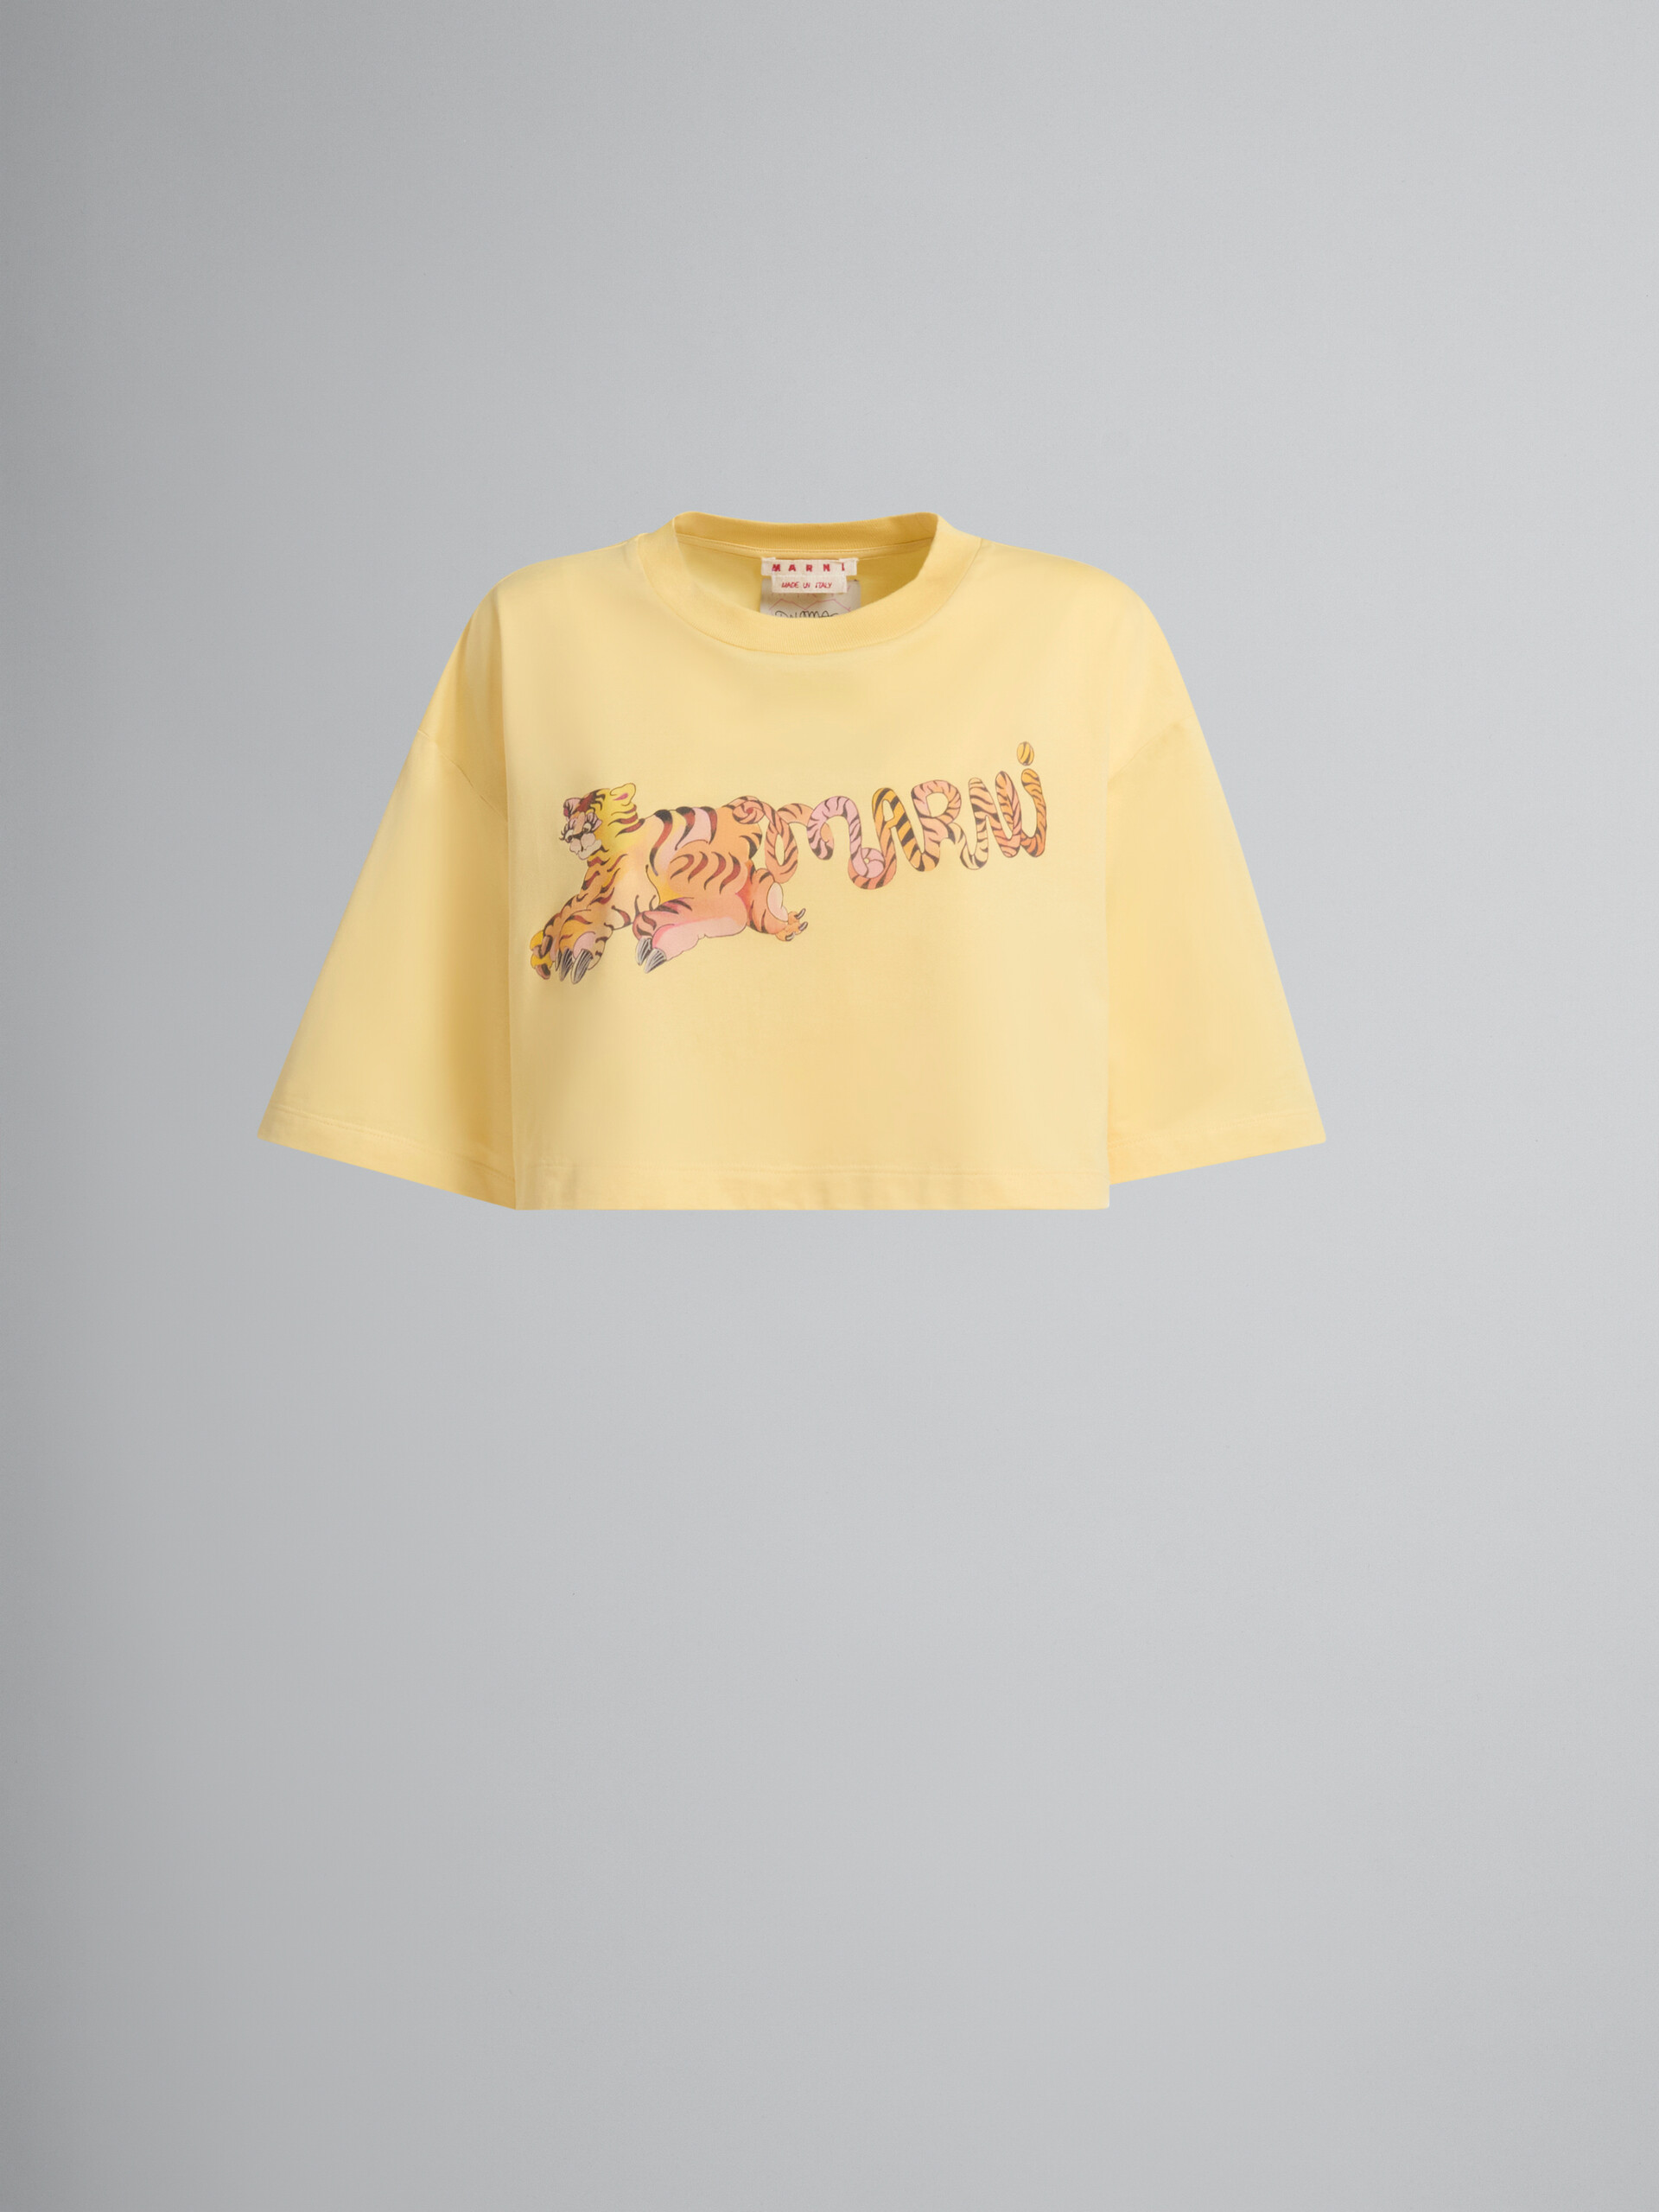 T-shirt crop in cotone biologico giallo con stampa - T-shirt - Image 1